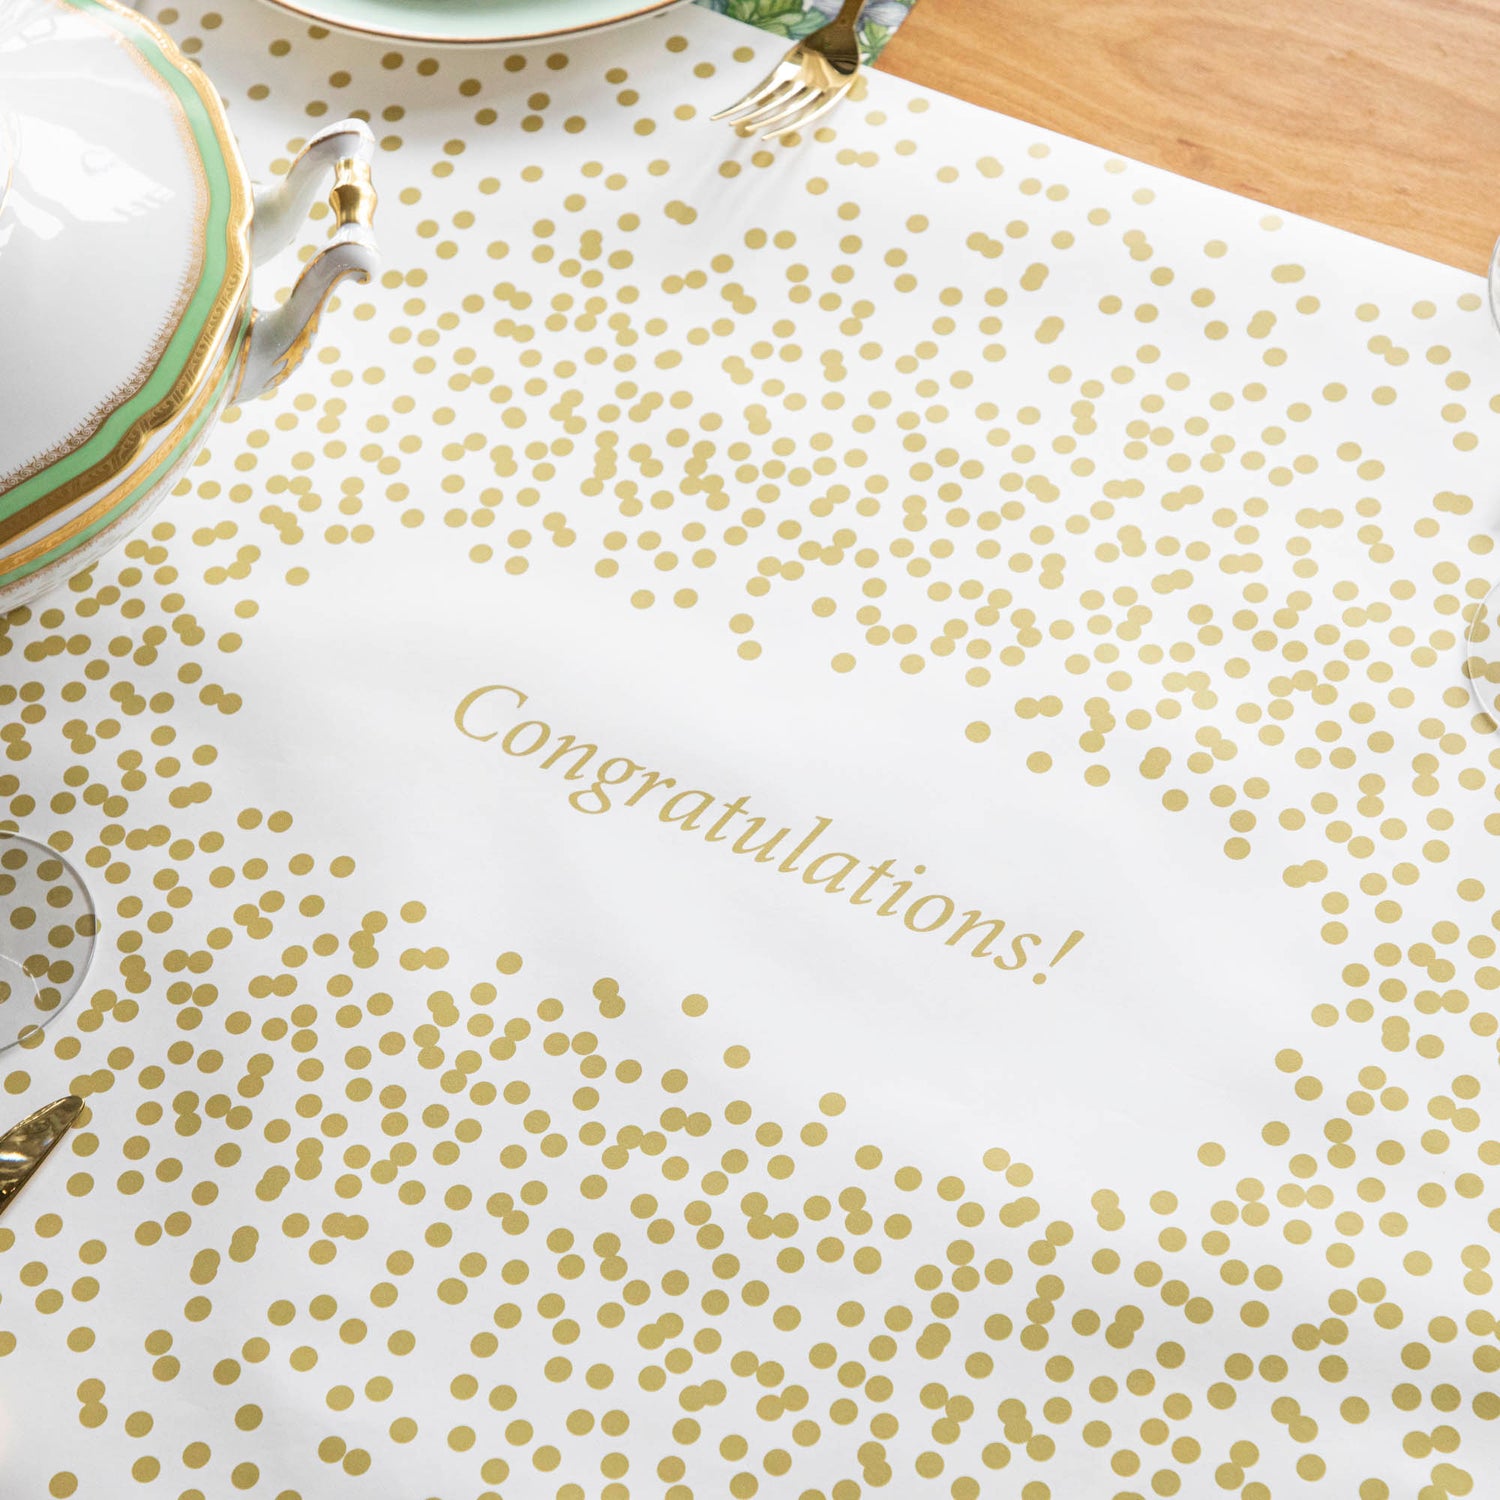 The Gold Confetti Personalized Runner under an elegant table setting, with &quot;Congratulations!&quot; printed in gold in the center.